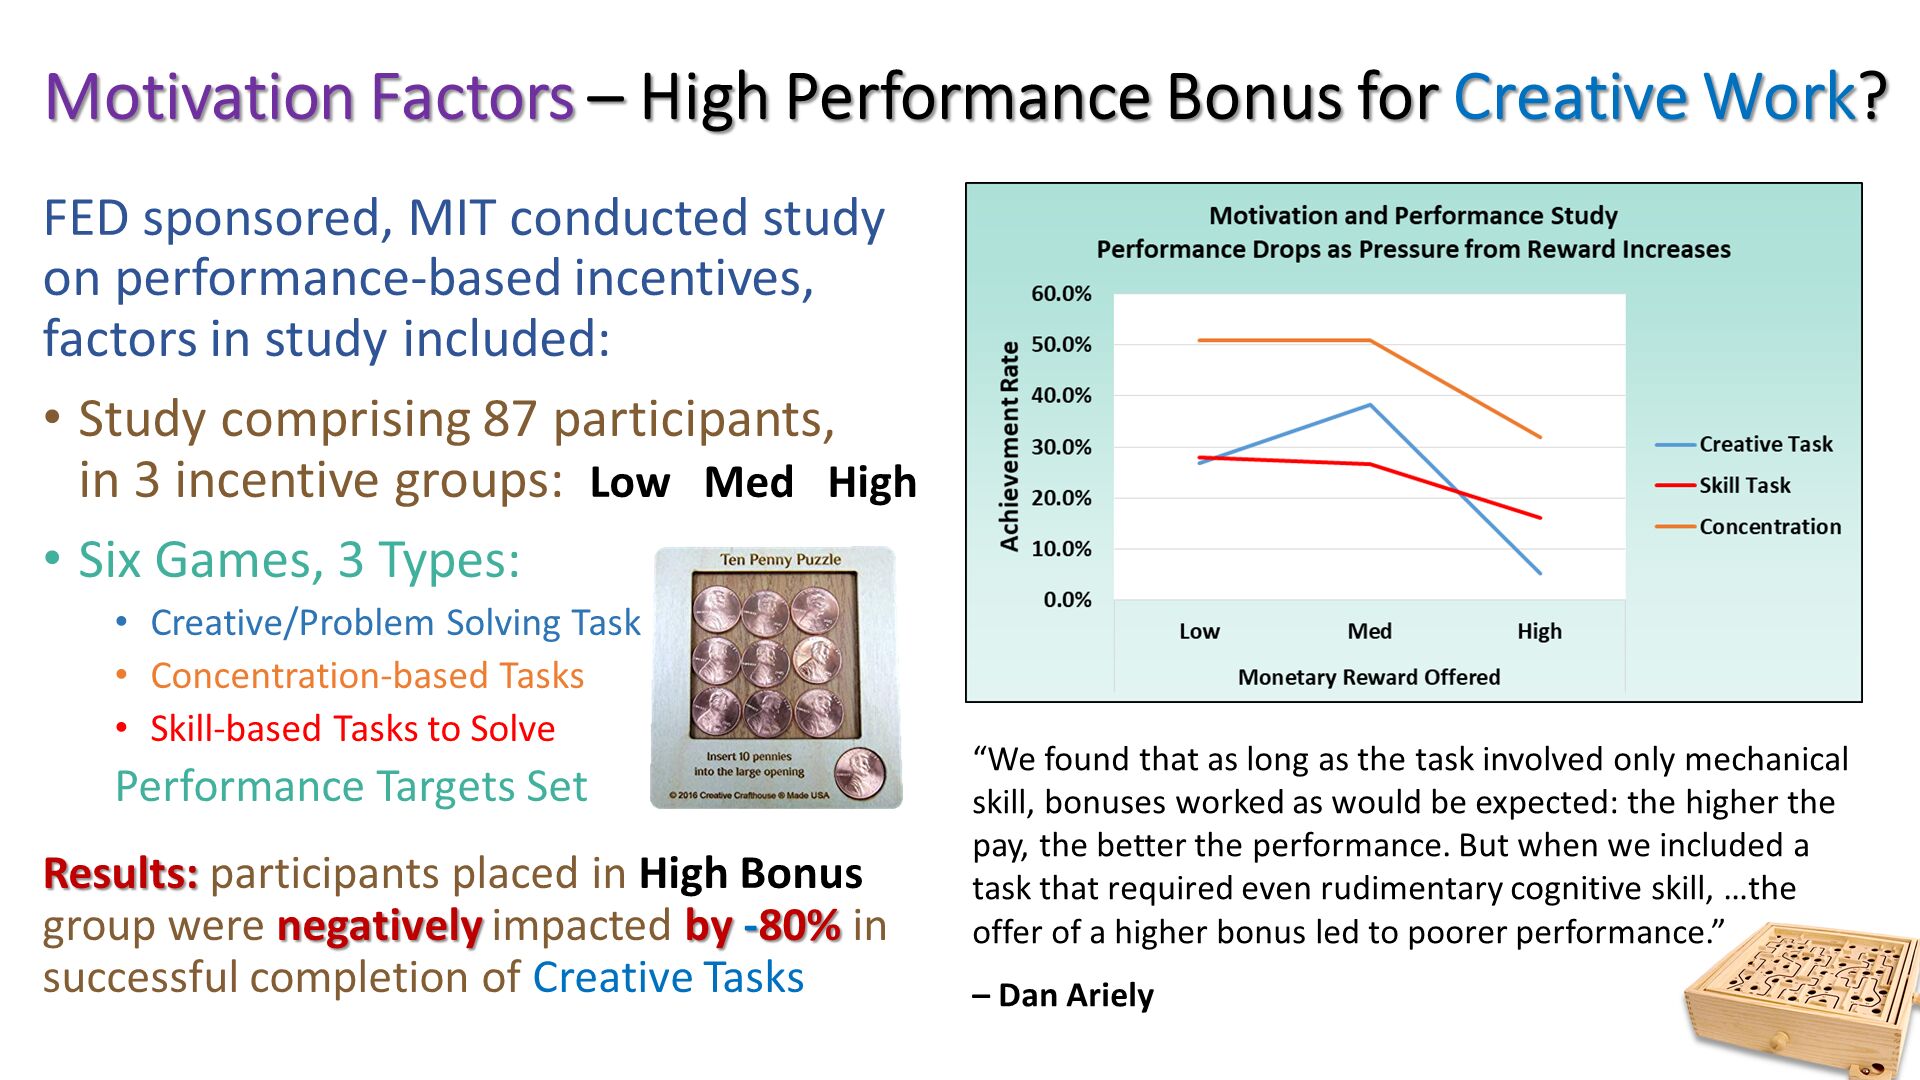 Motivation Factors – High Performance Bonus for Creative Work?. “We found that as long as the task involved only mechanical skill, bonuses worked as would be expected: the higher the pay, the better the performance. But when we included a task that required even rudimentary cognitive skill, …the offer of a higher bonus led to poorer performance.”
– Dan Ariely . FED sponsored, MIT conducted study on performance-based incentives, factors in study included:
Study comprising 87 participants,in 3 incentive groups:  Low   Med   High
Six Games, 3 Types:
Creative/Problem Solving Task
Concentration-based Tasks
Skill-based Tasks to Solve
Performance Targets Set
Results: participants placed in High Bonus group were negatively impacted by -80% in successful completion of Creative Tasks. 